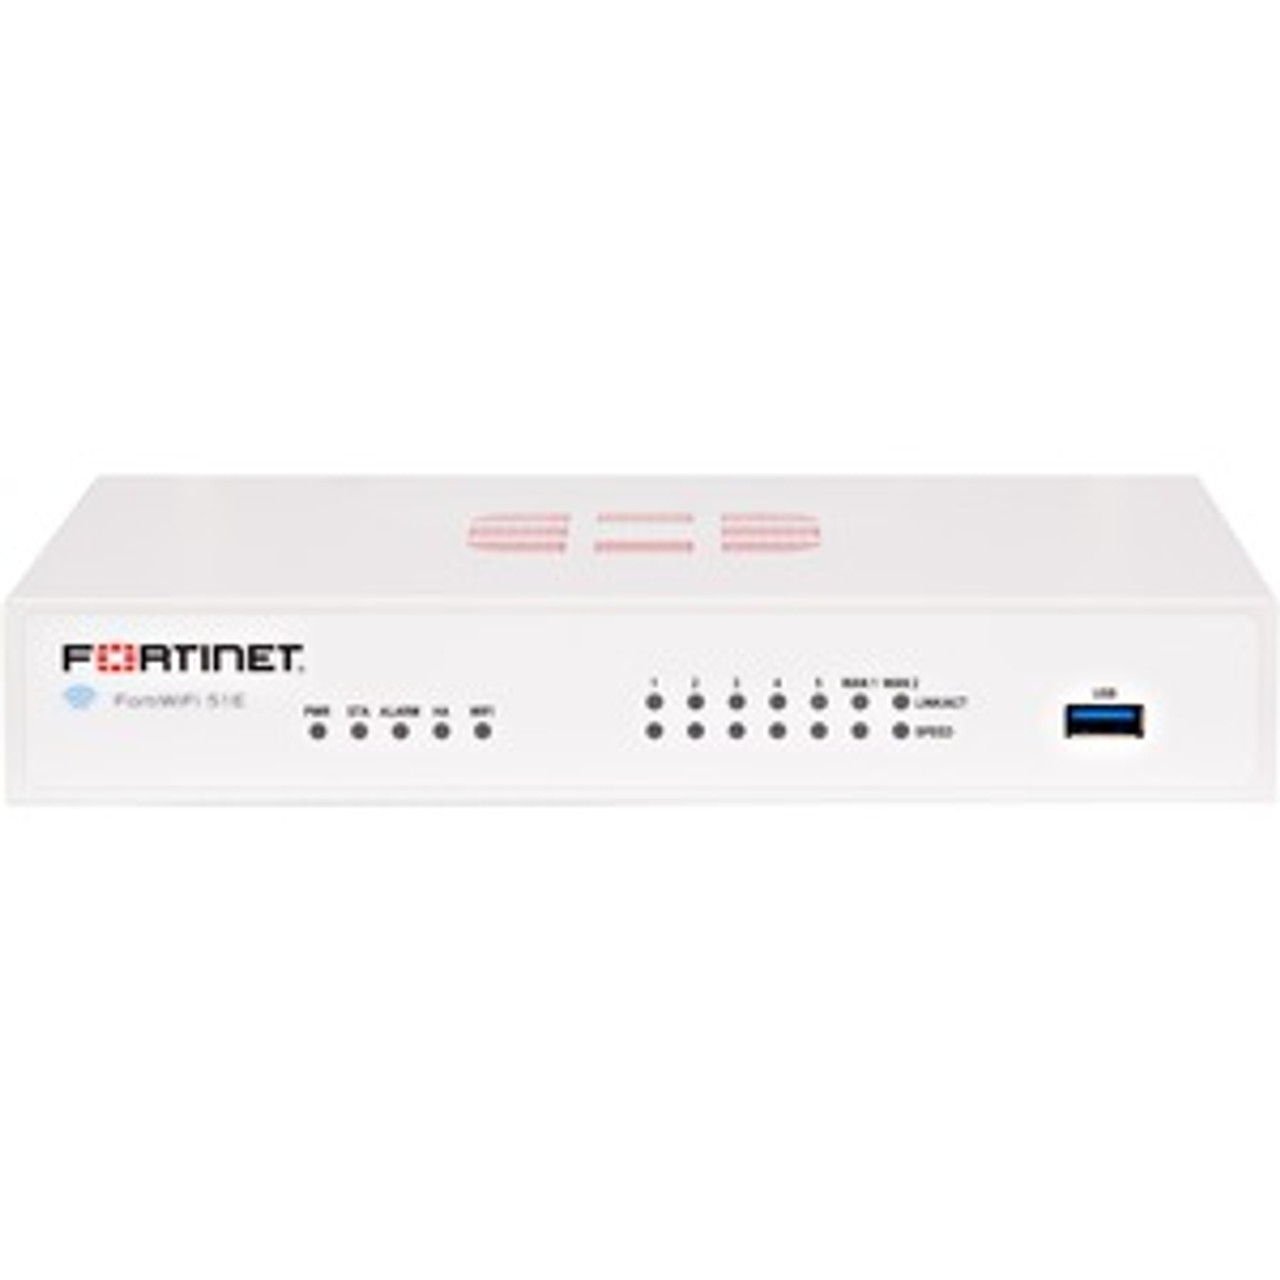 Fortinet FortiWifi FWF-51E Network Security/Firewall Appliance - 7 Port - 10/100/1000Base-T - Gigabit Ethernet - Wireless LAN IEEE 802.11a/b/g/n - AES (256-bit), SHA-256 - 200 VPN - 5 x RJ-45 - 5 Years 24X7 Forticare and Fortiguard UTP,